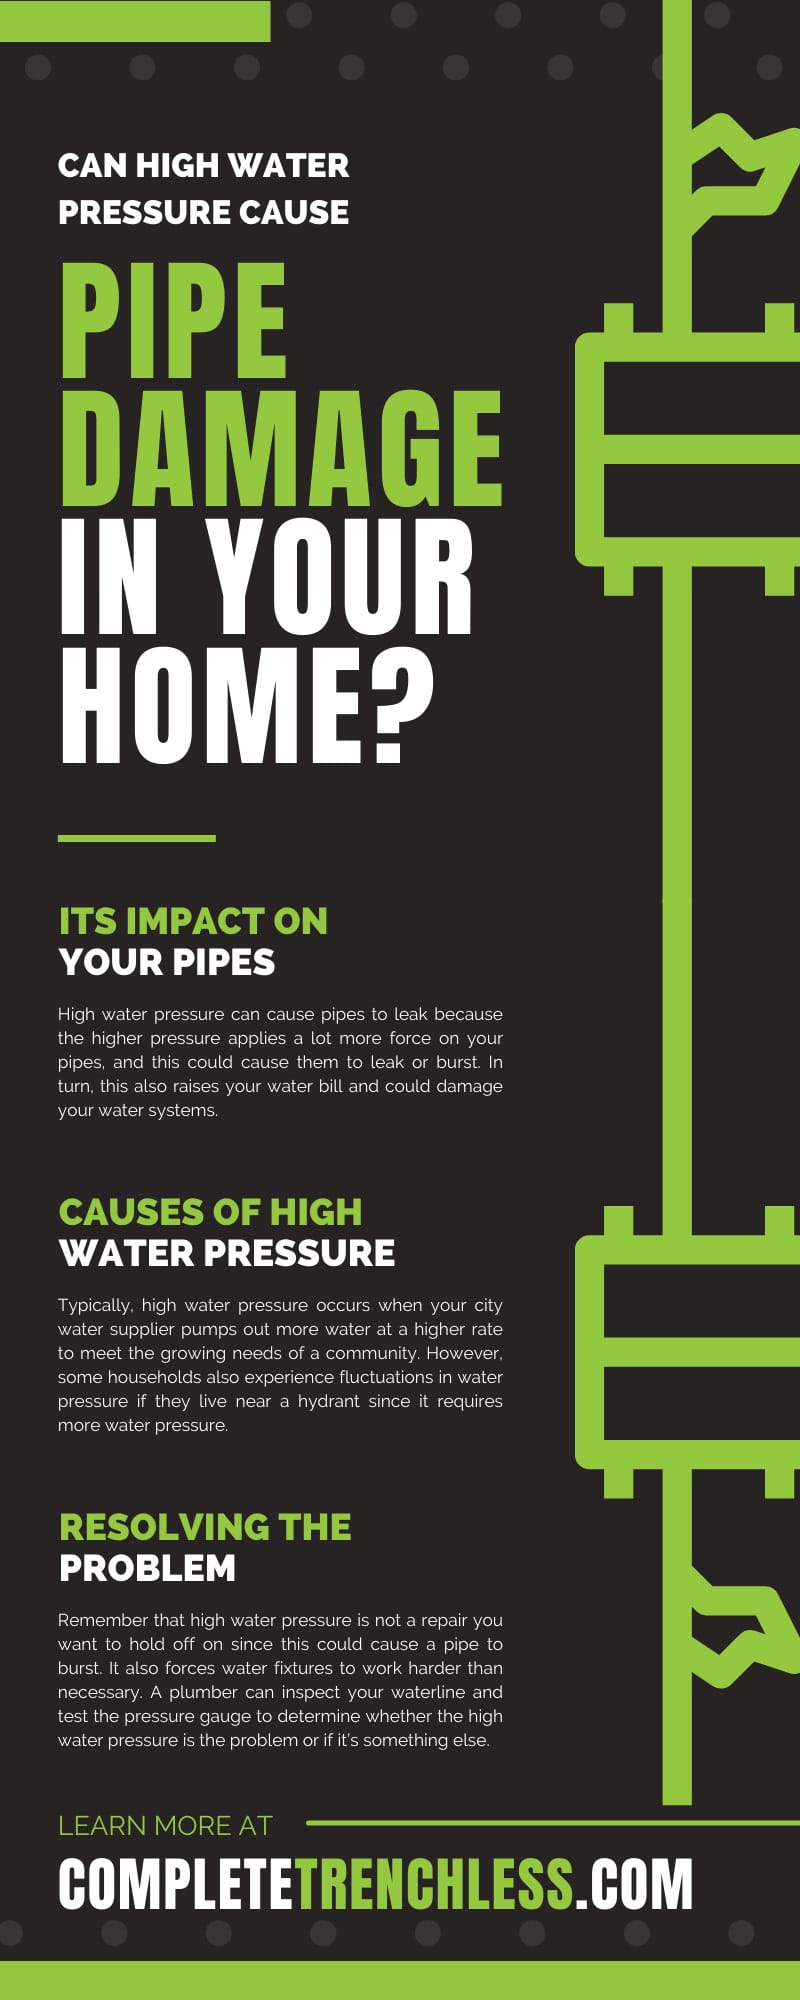 Can High Water Pressure Cause Pipe Damage in Your Home?